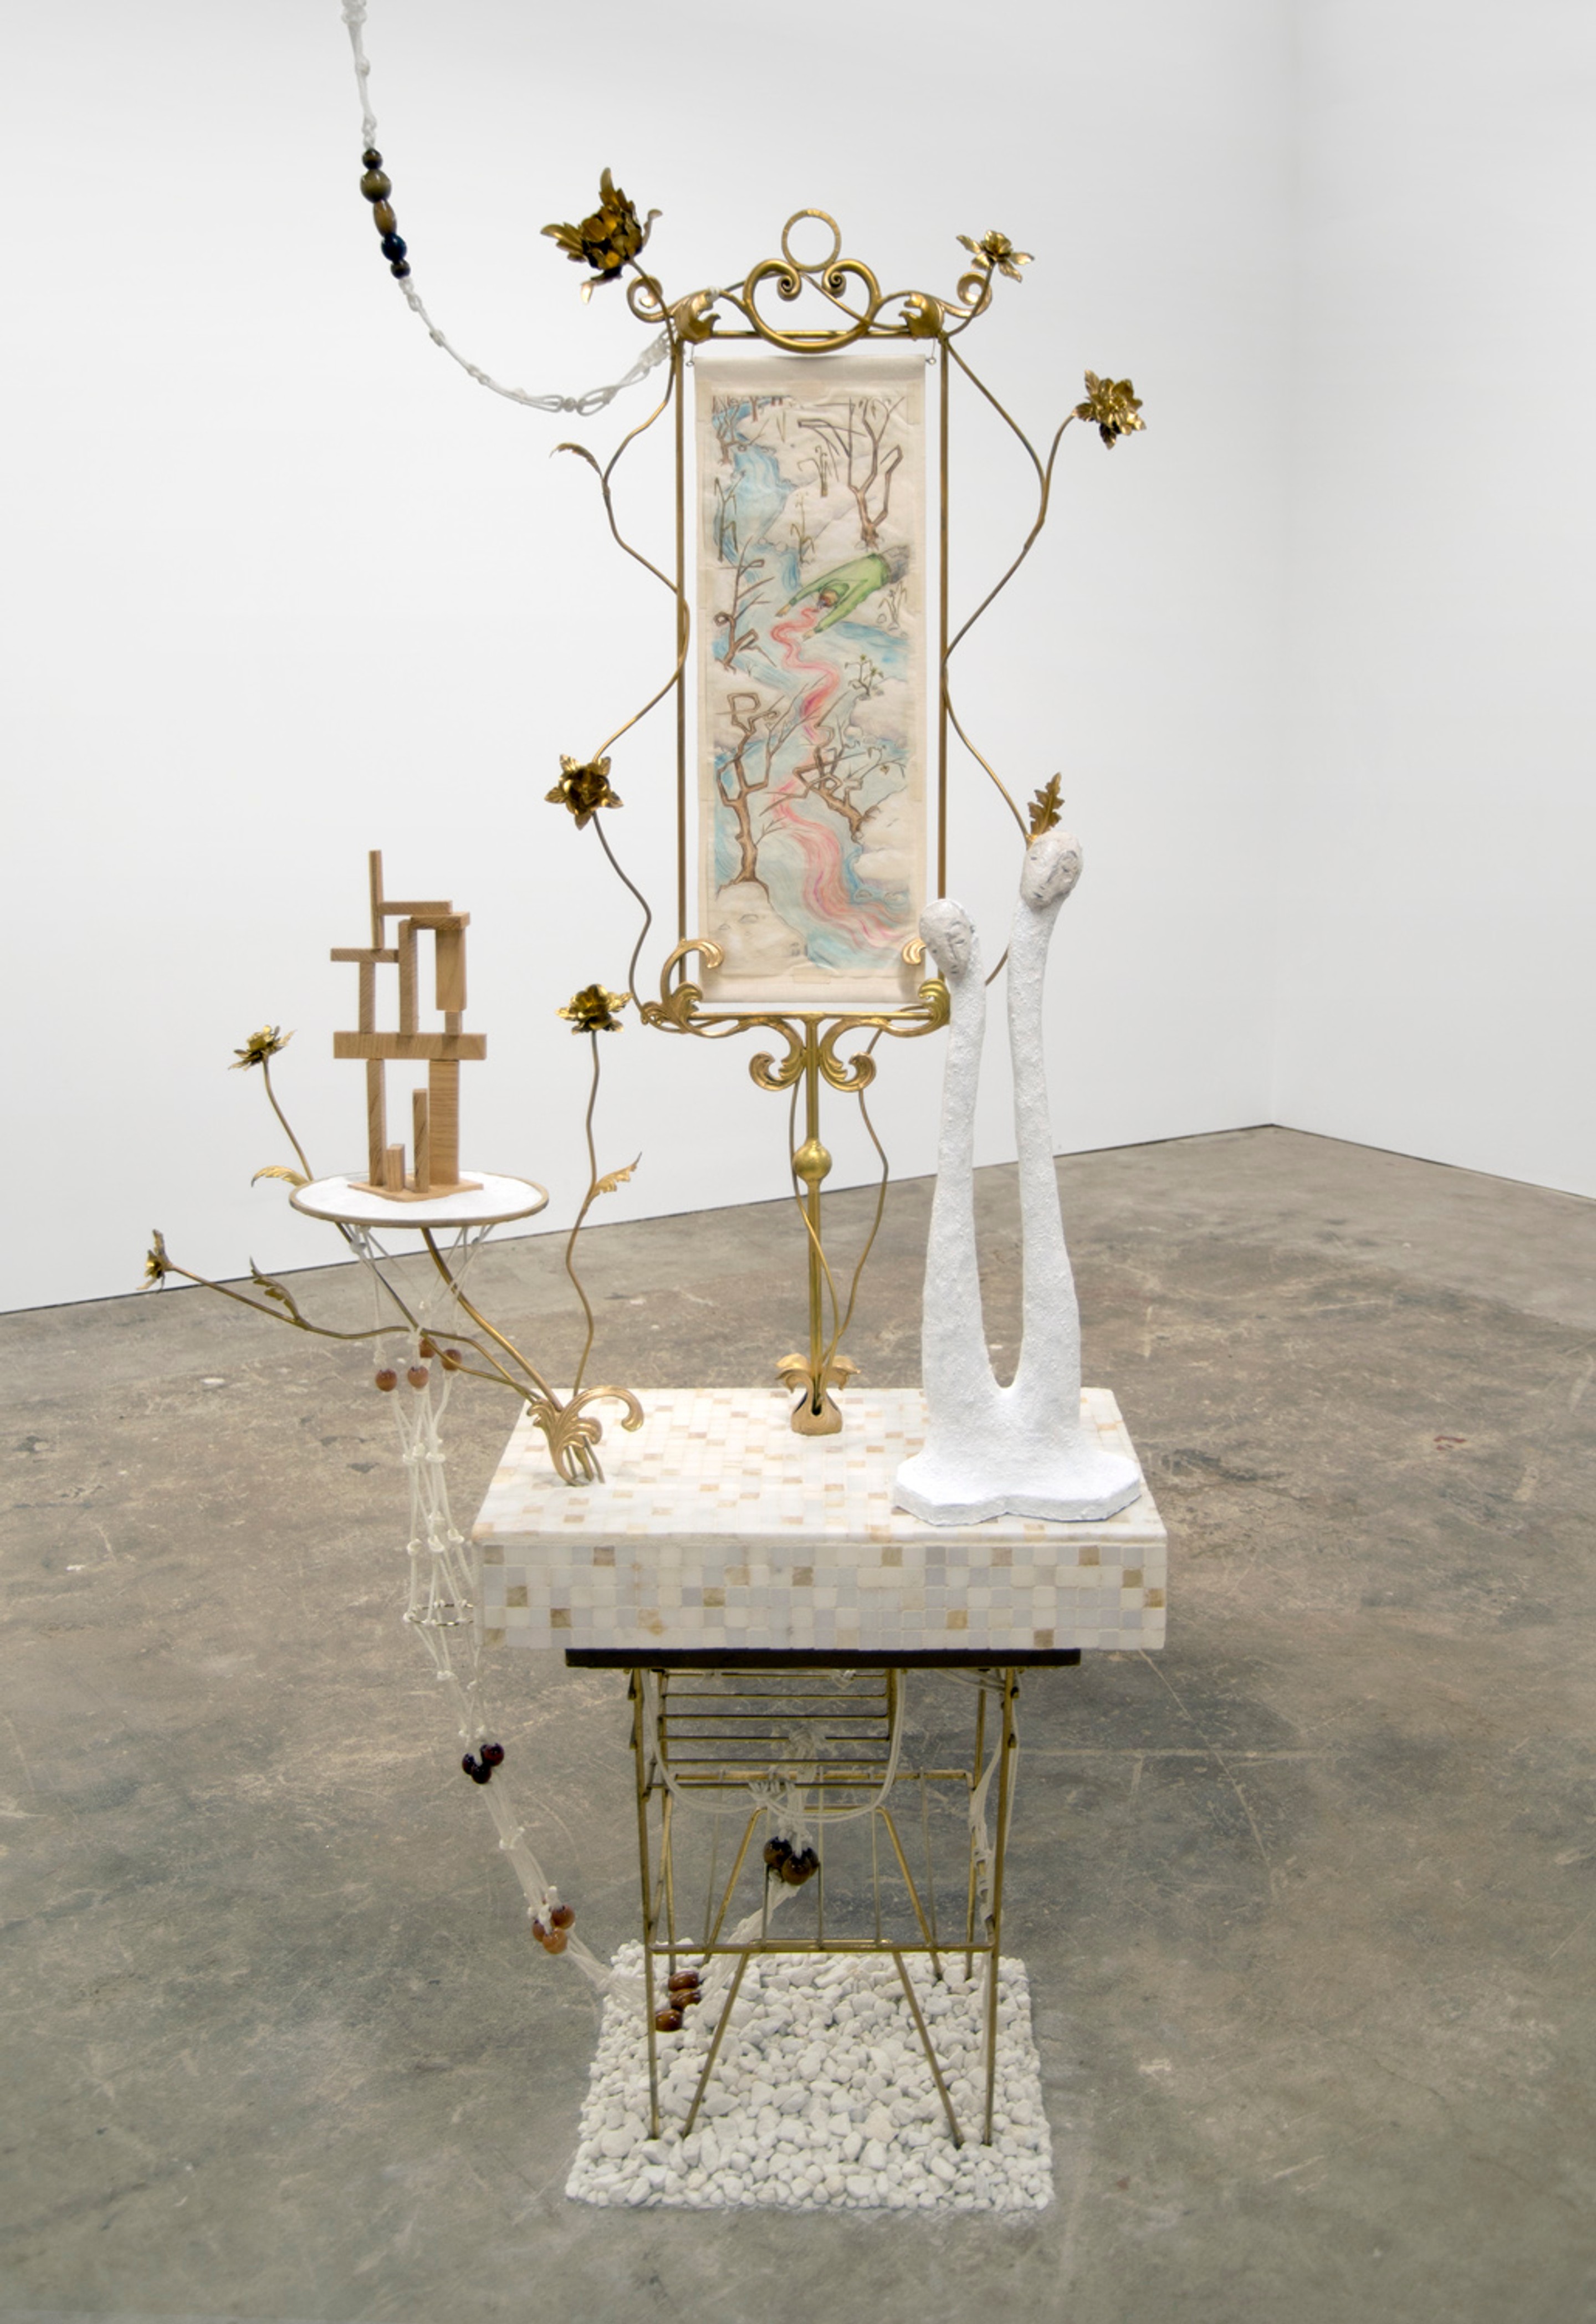 Mindy Rose Schwartz, Before (2008). Pencil and ink on mulberry paper mounted on linen; welded steel, papier mâché, wood, mosaic, nylon rope, wooden beads, sand, rocks.